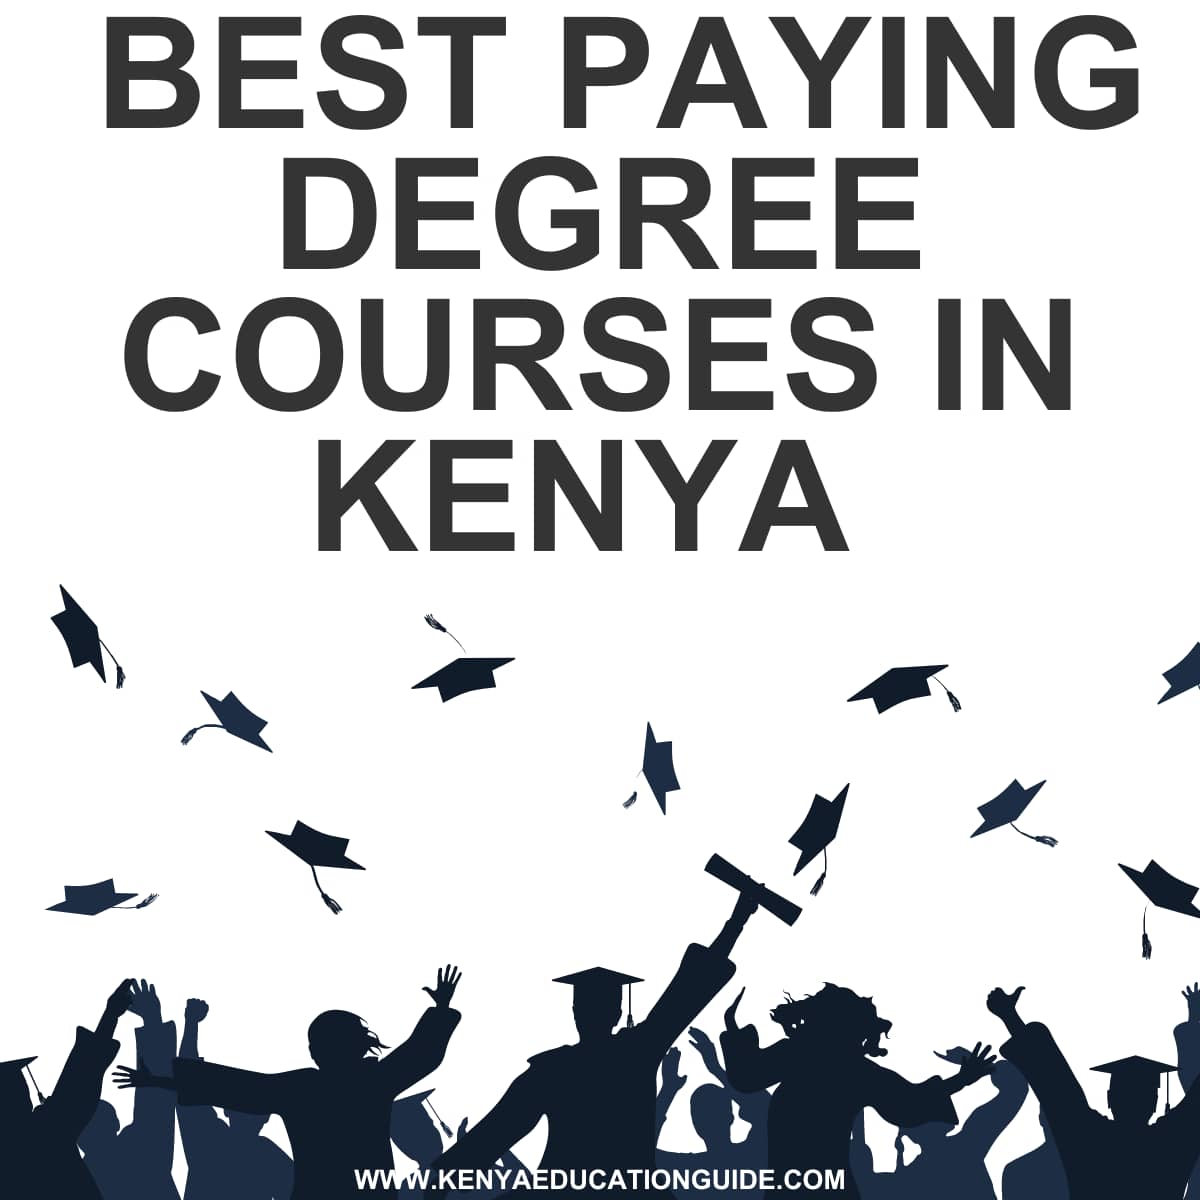 Best Paying Degree Courses in Kenya